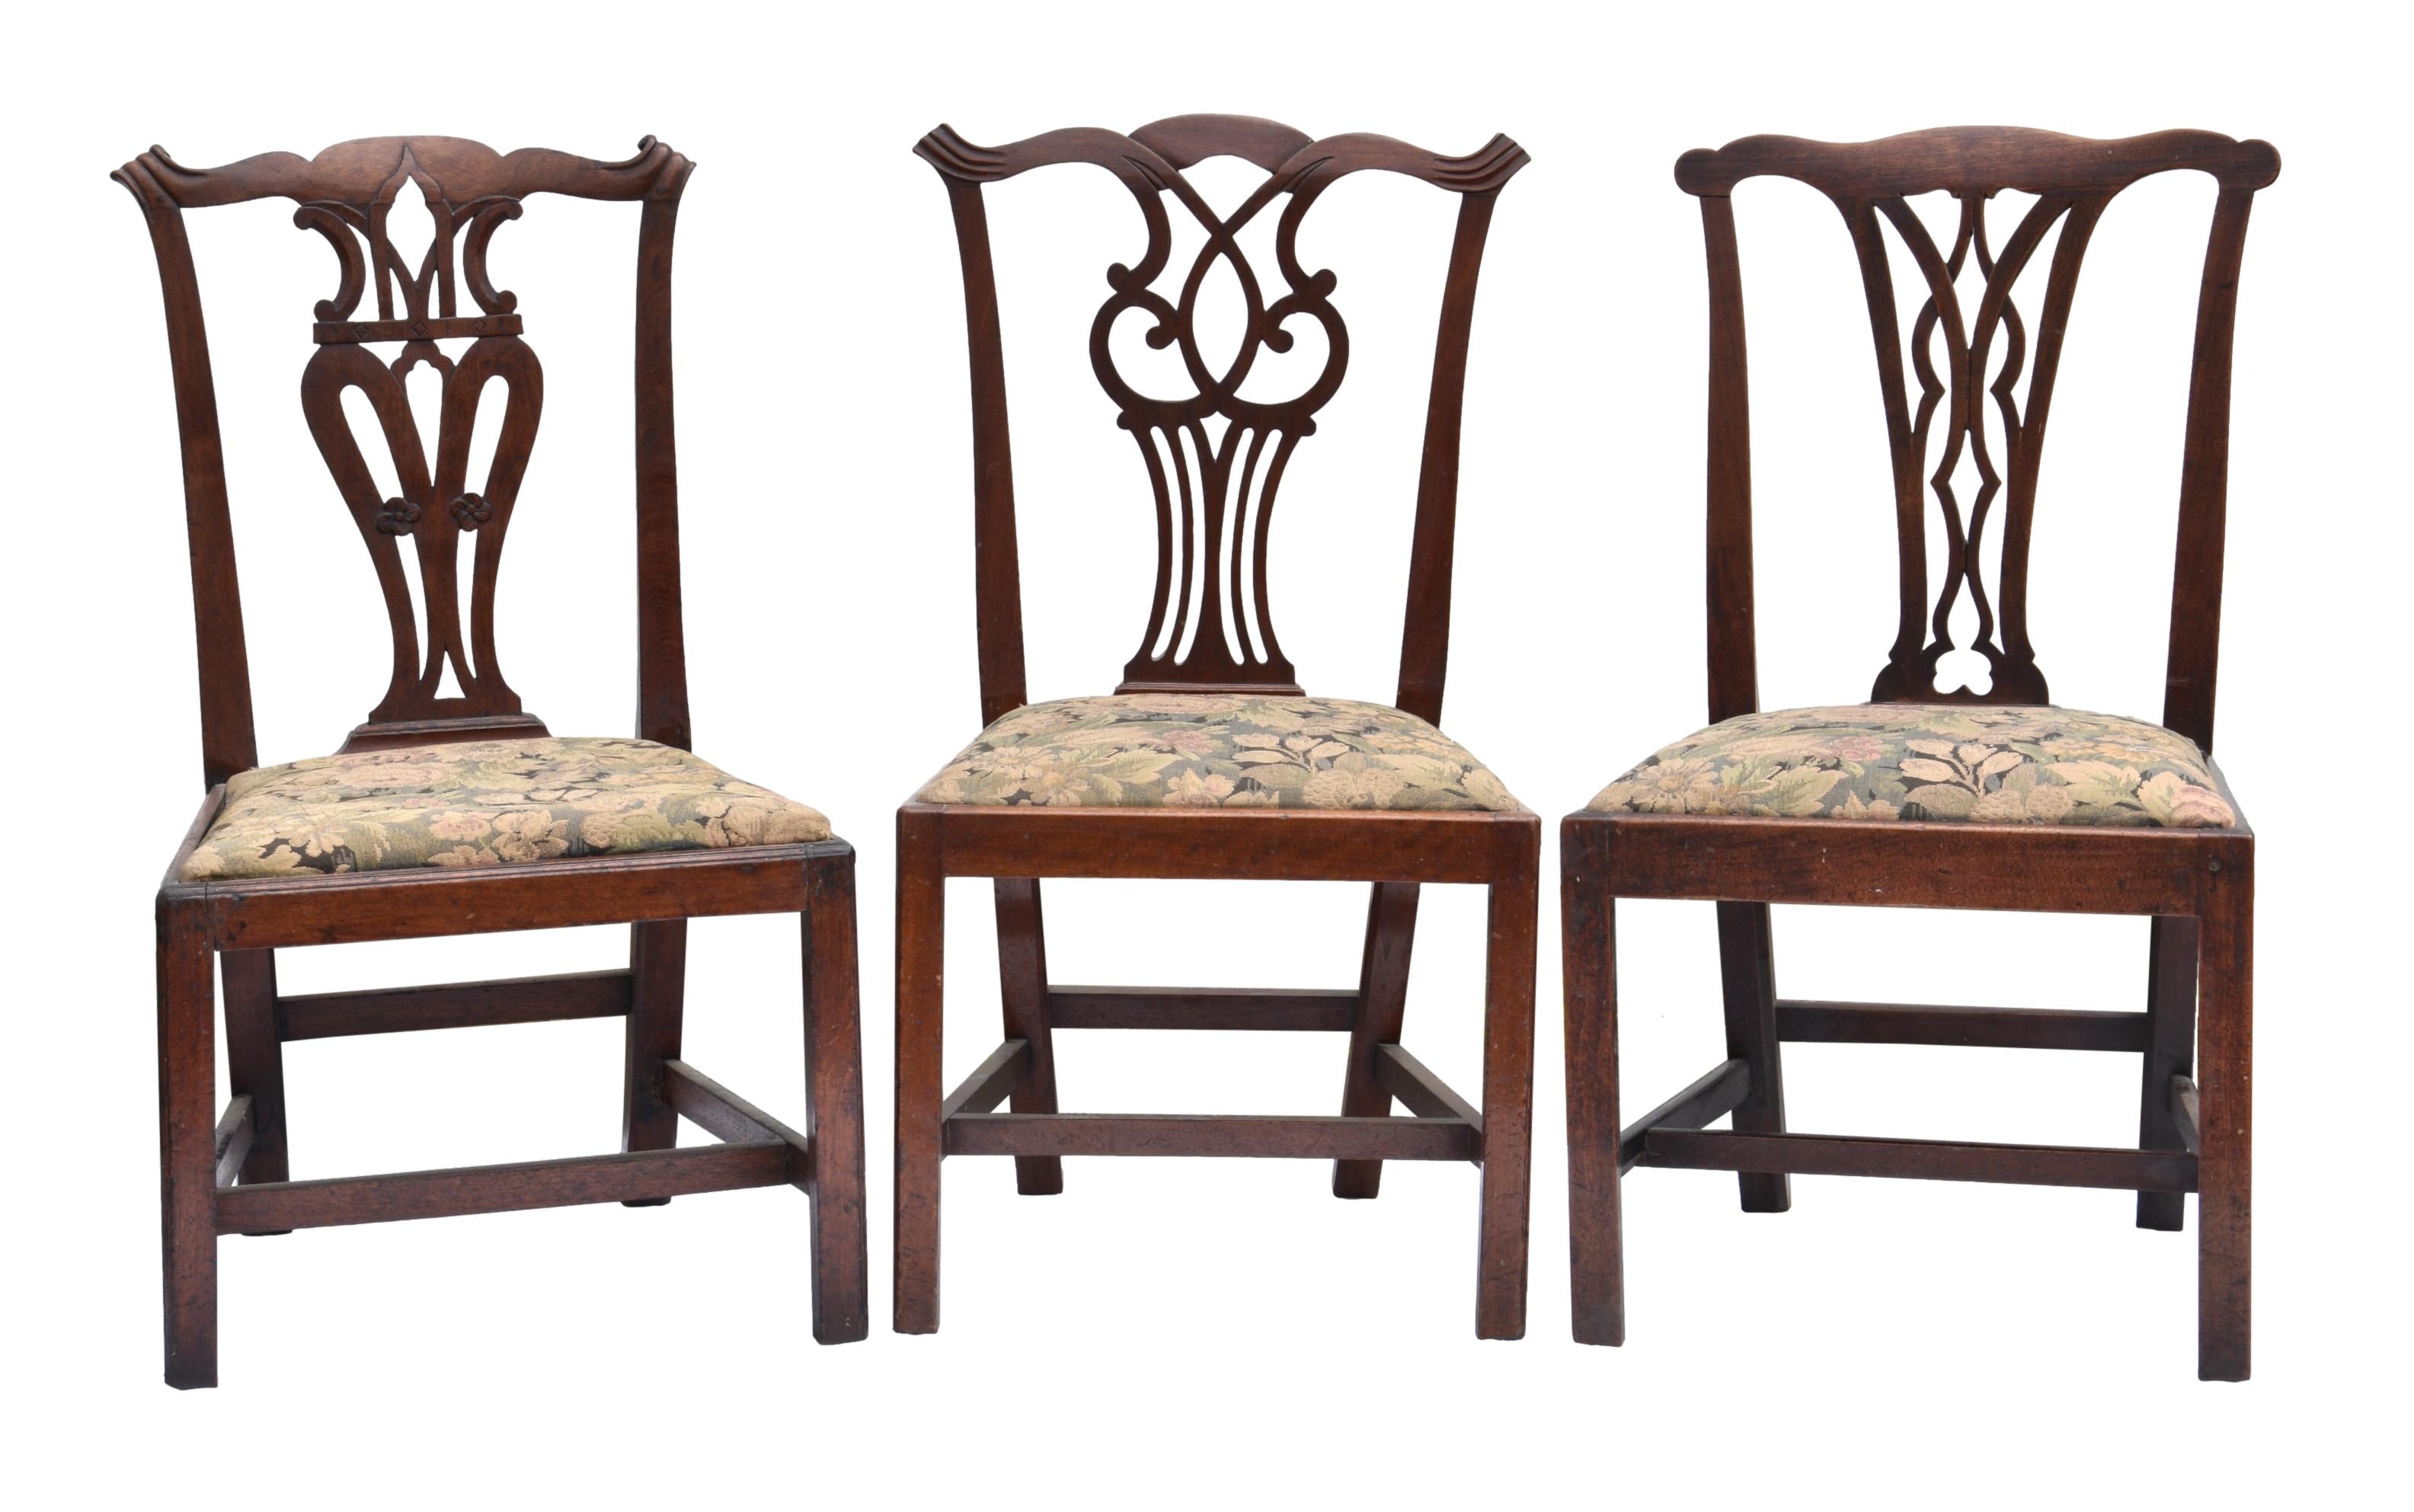 Three George III Chippendale style mahogany dining chairs